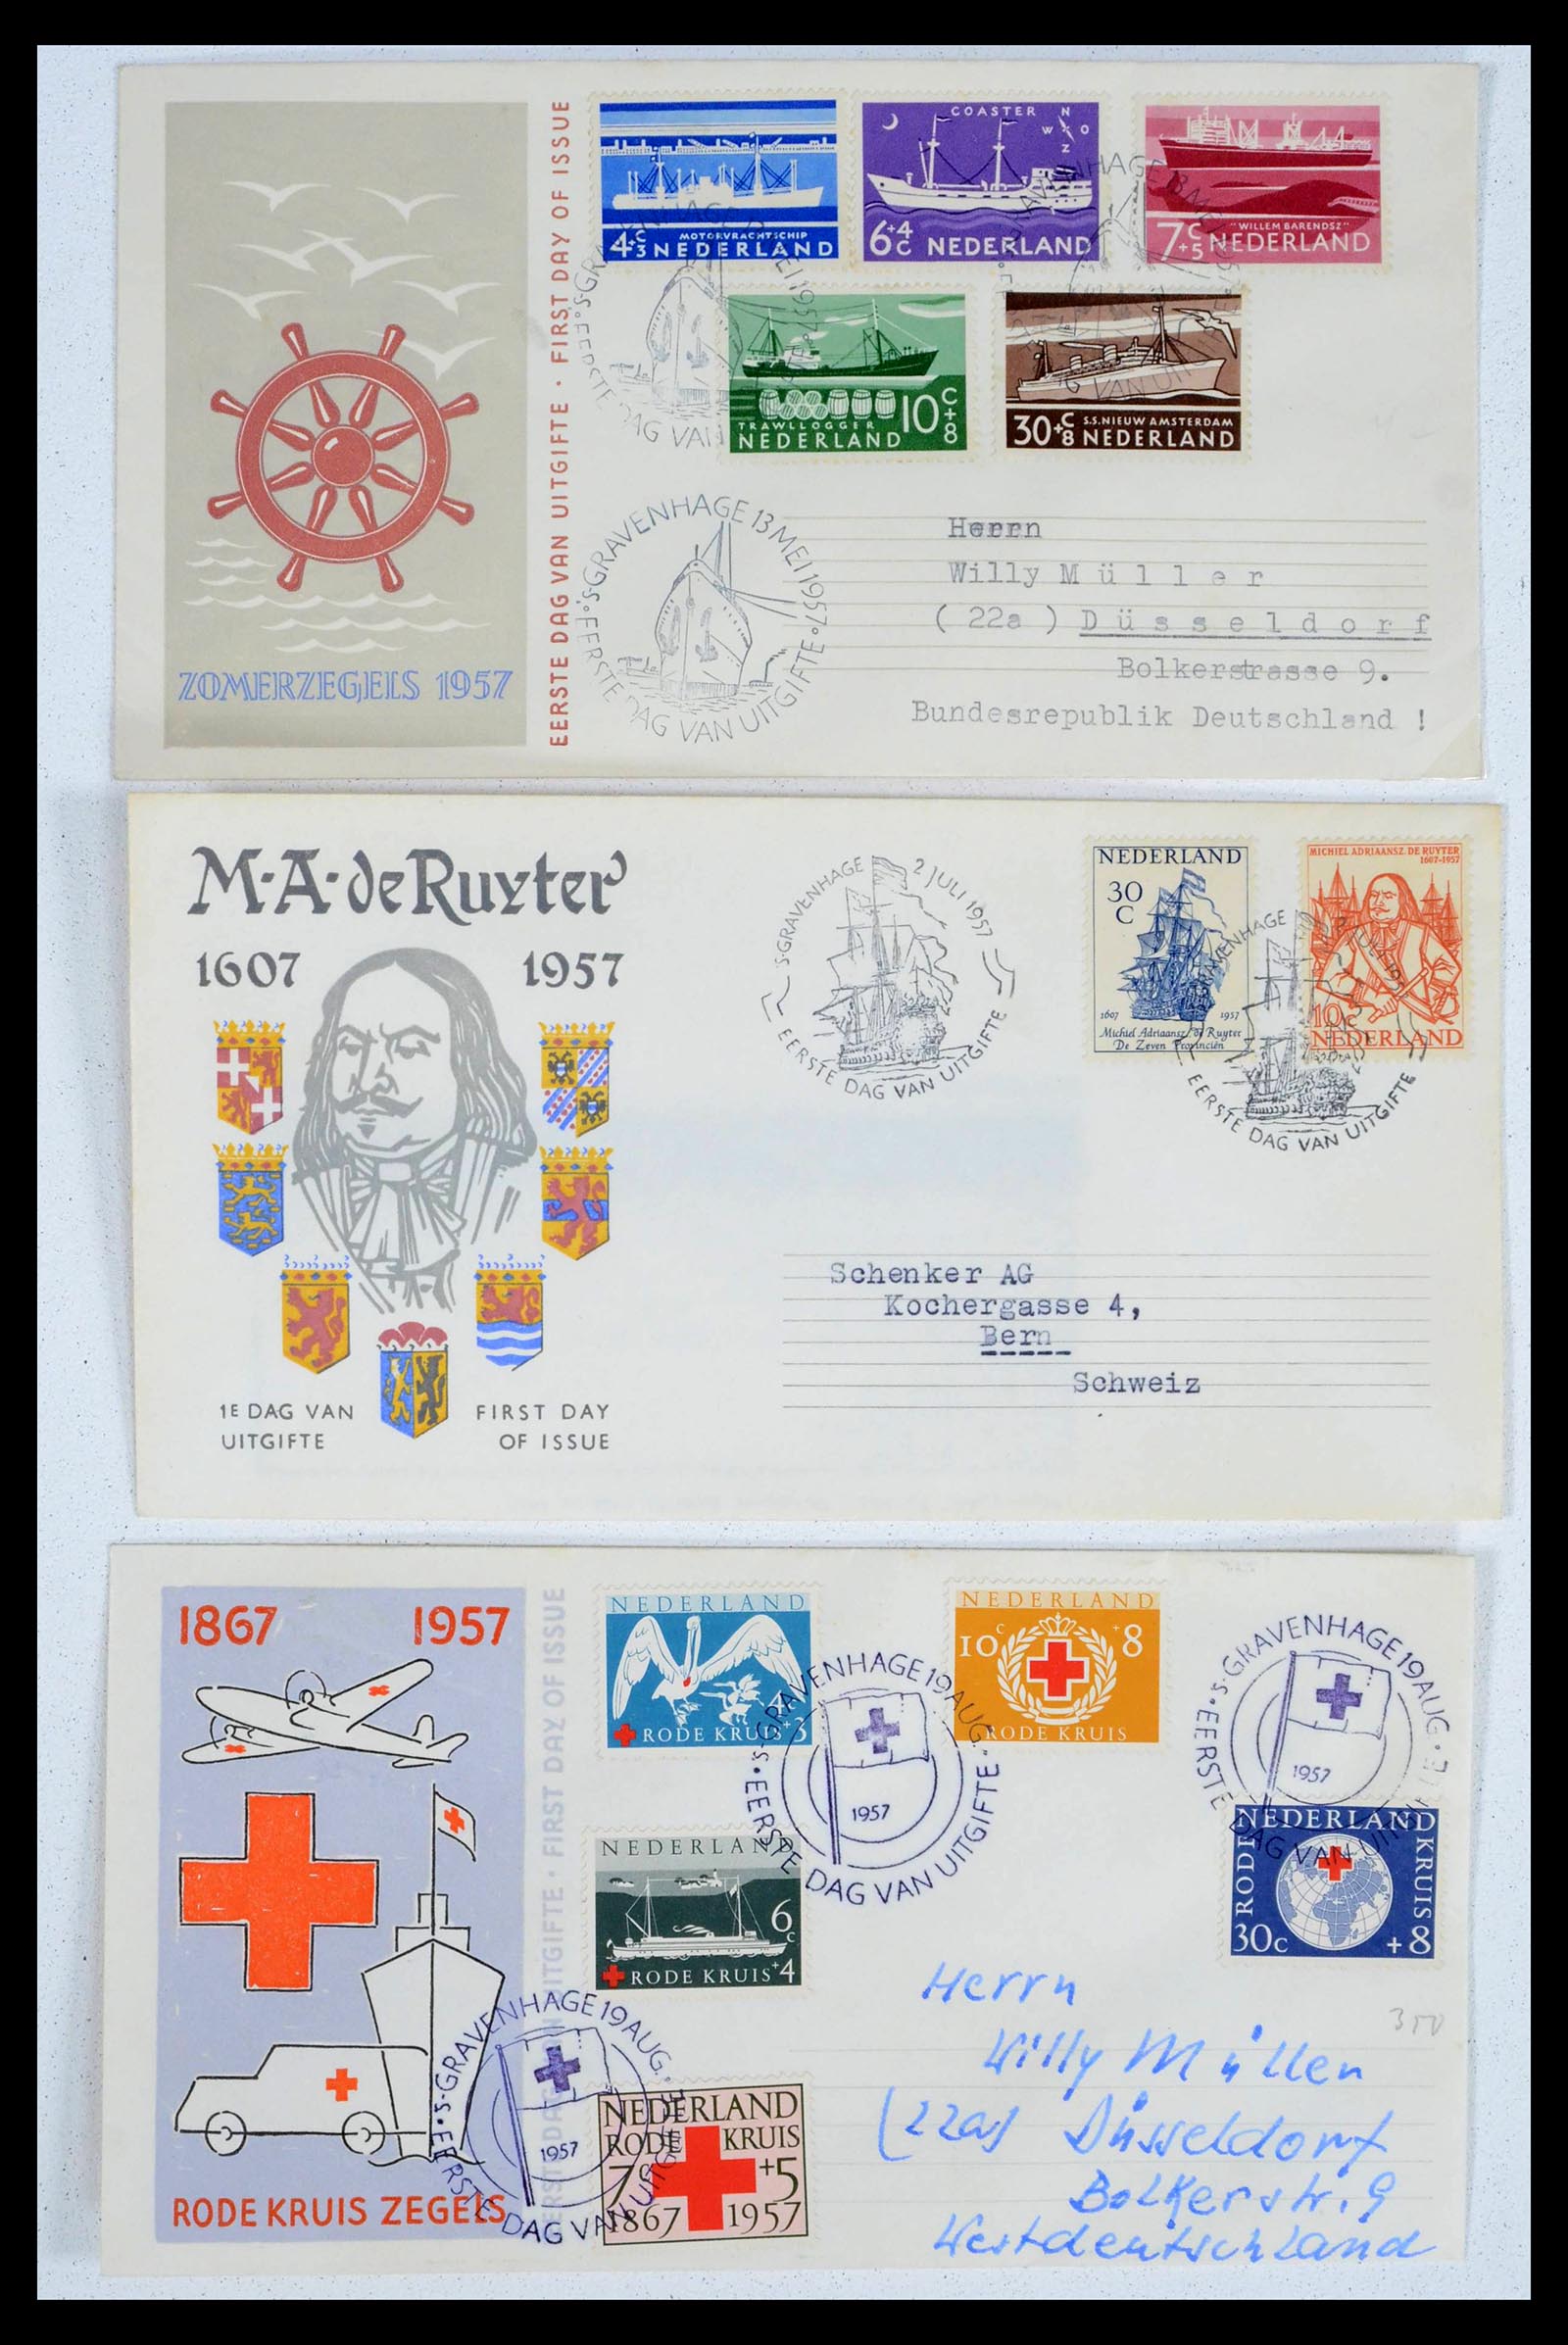 39474 0016 - Stamp collection 39474 Netherlands FDC's 1950-1960.